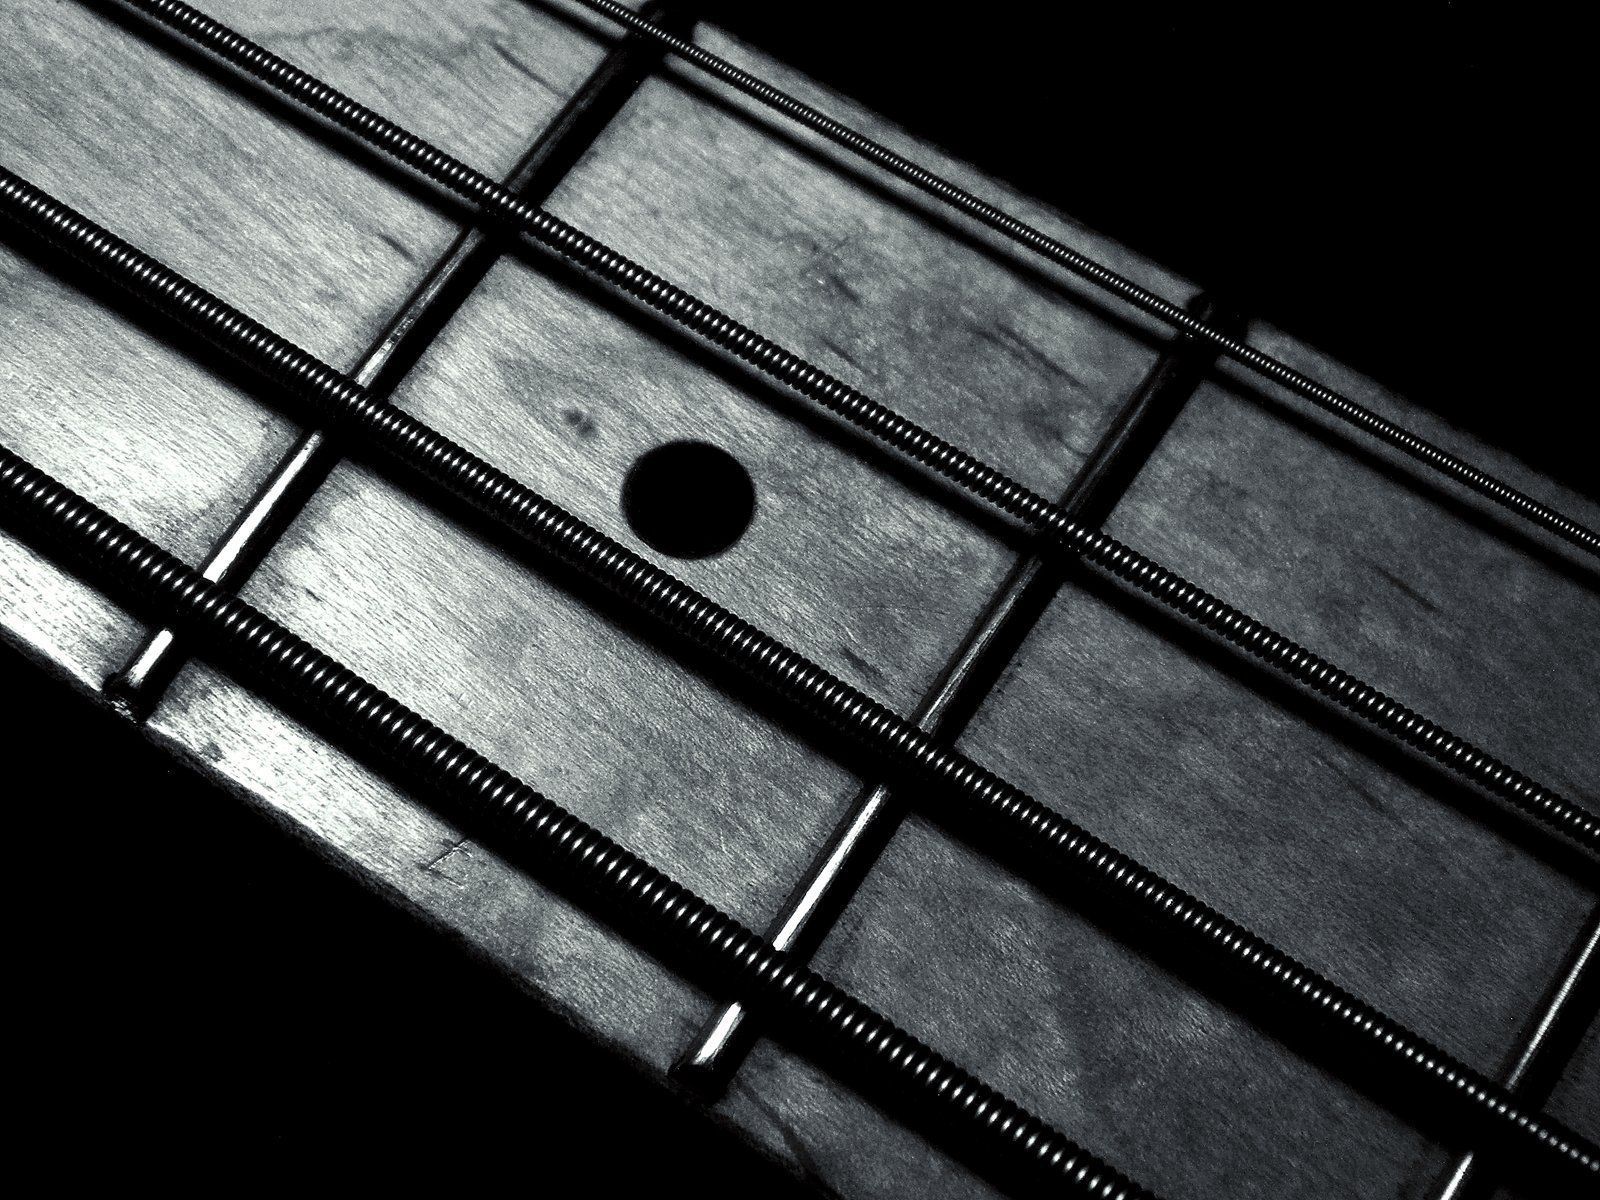 Top Bass Backgrounds Images for Pinterest